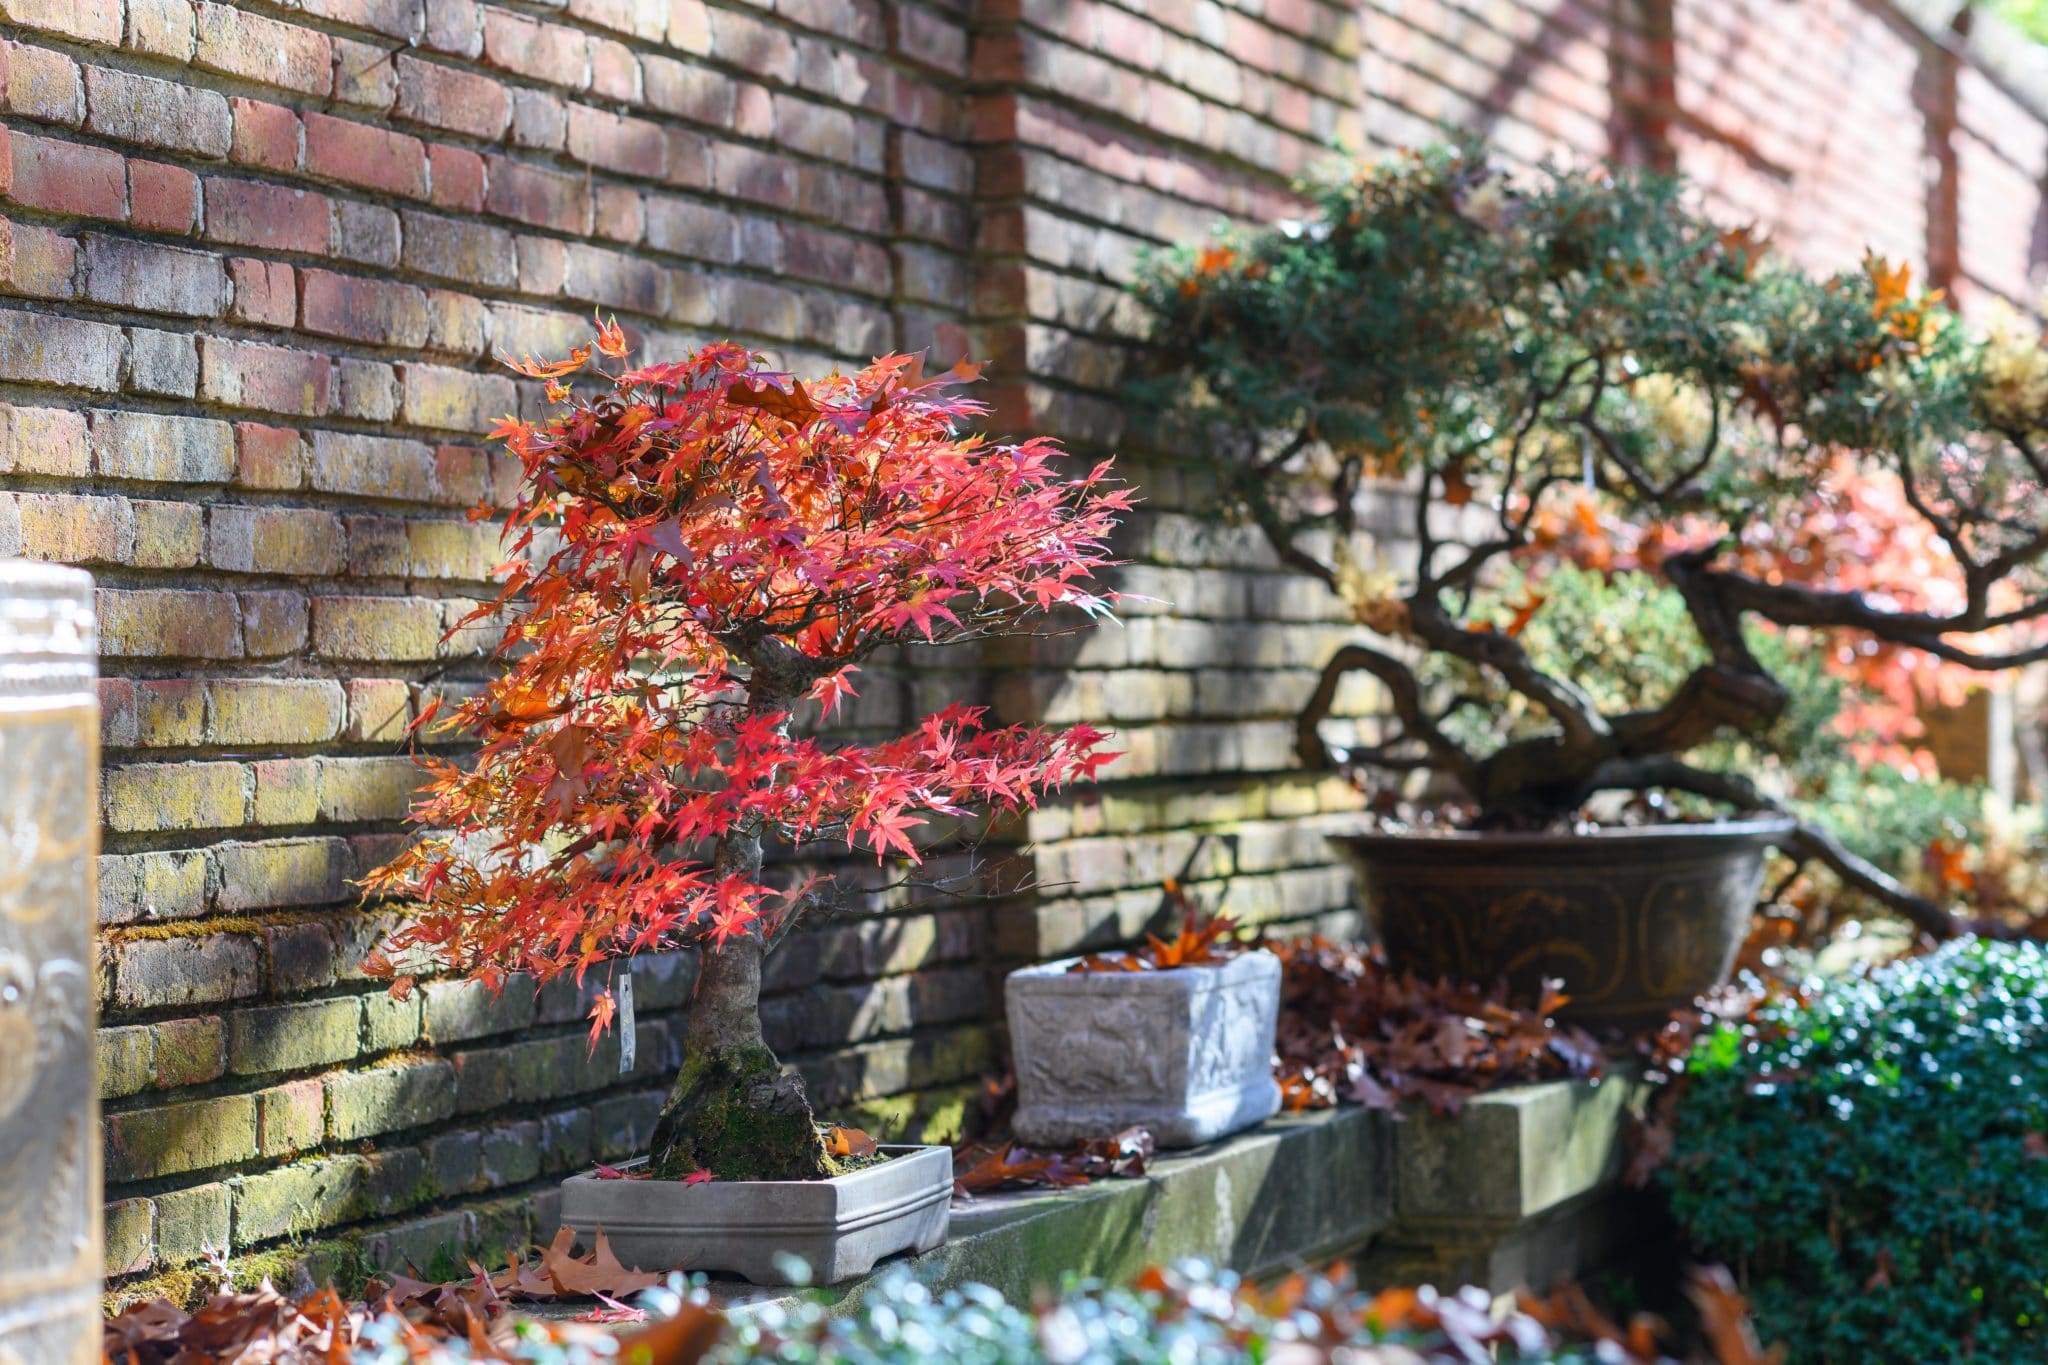 Japanese maple and juniper bonsai at Filoli (photo by Jeff Bartee)